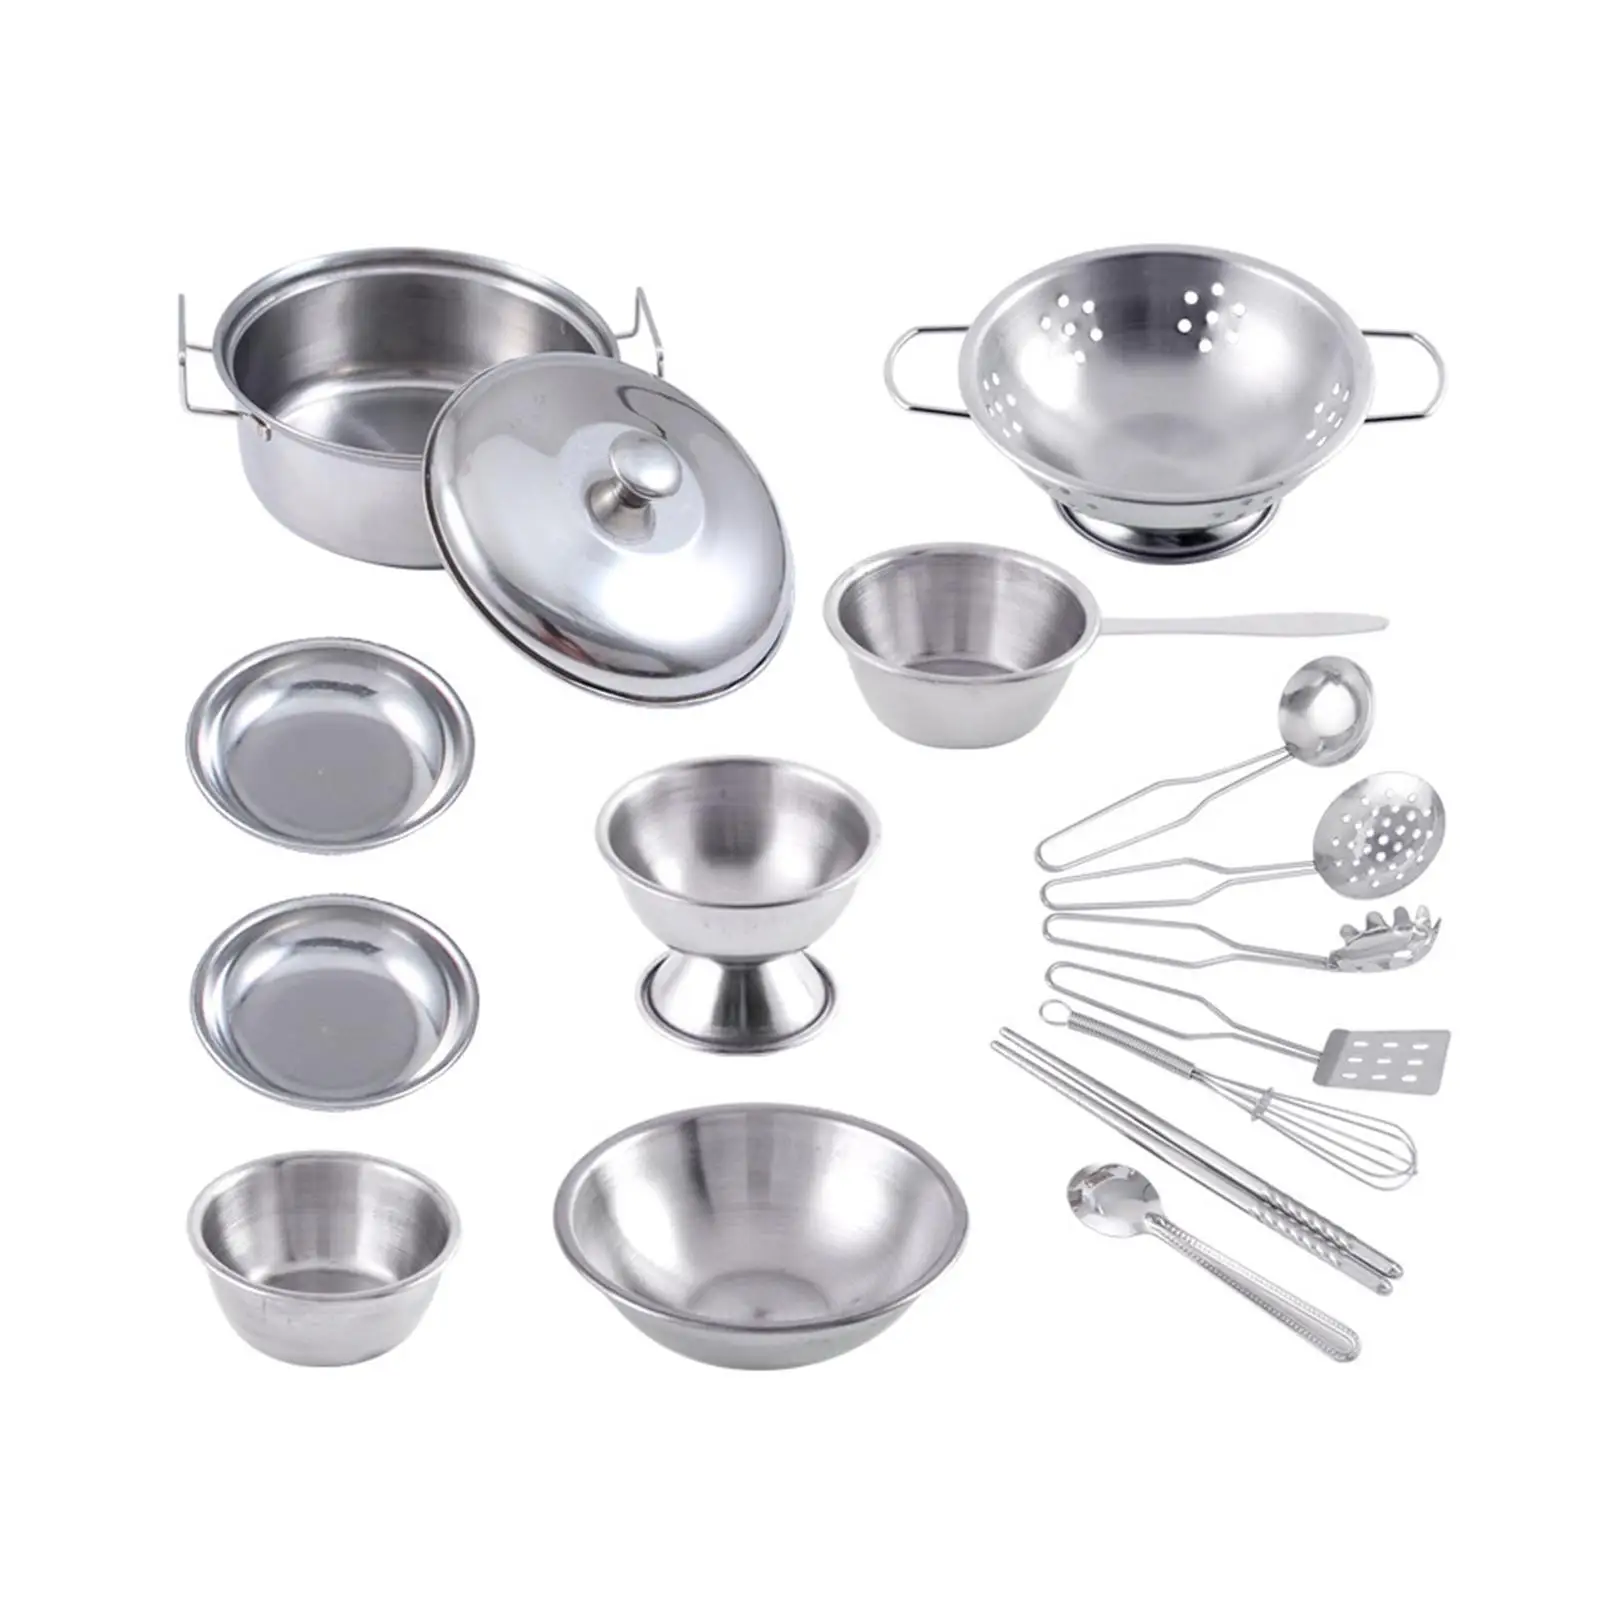 Pack of 16 Kitchen Pretend Toys Cooking Utensils Stainless Steel Accessories for Child Play House Role Playing Fine Polishing